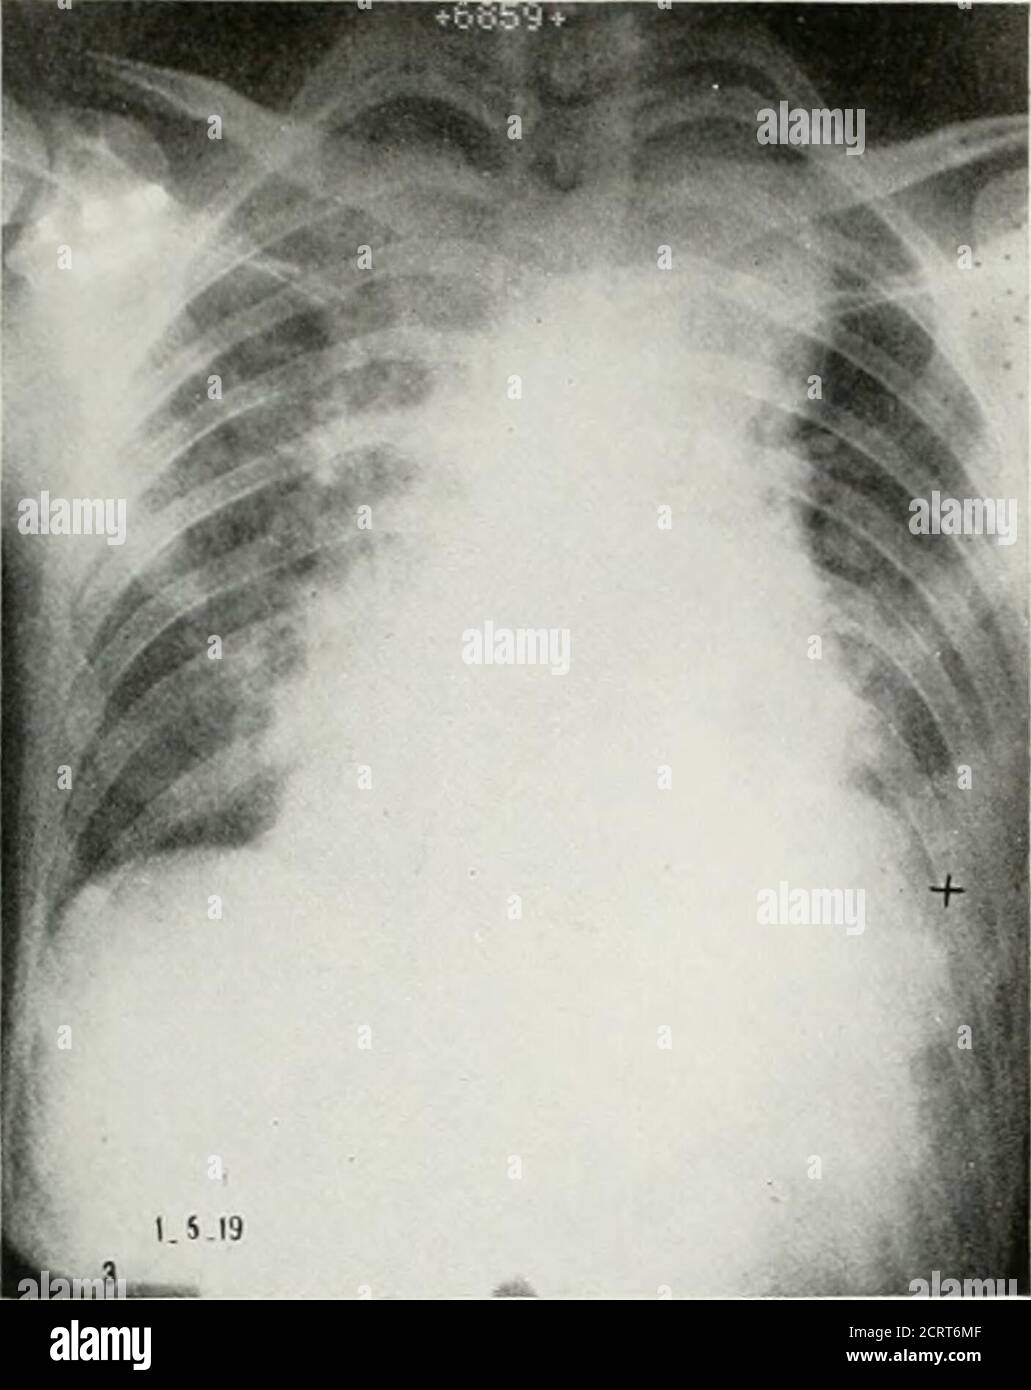 . The American journal of roentgenology, radium therapy and nuclear medicine . Fig. I. Shows hcmnrrhagic pneumonitis of lower right,diffuse mottling of upper and middle right lobes, dif-fuse mottling of lower and slight mottling of upperleft lobe. Costophrenic angle on left is obscured.Mediastinal glands are enlarged. Arrow points to areaof abnormal density in mediastinum, which subsequentfilms prove was a developing mediastinal abscess. IJ-29-18 Fig. 2. The armu pMiiis to the large mediastinal ab-scess. The cross mdicates the presence of empyema ofthe lower left che.sl. The heart silhouette i Stock Photo